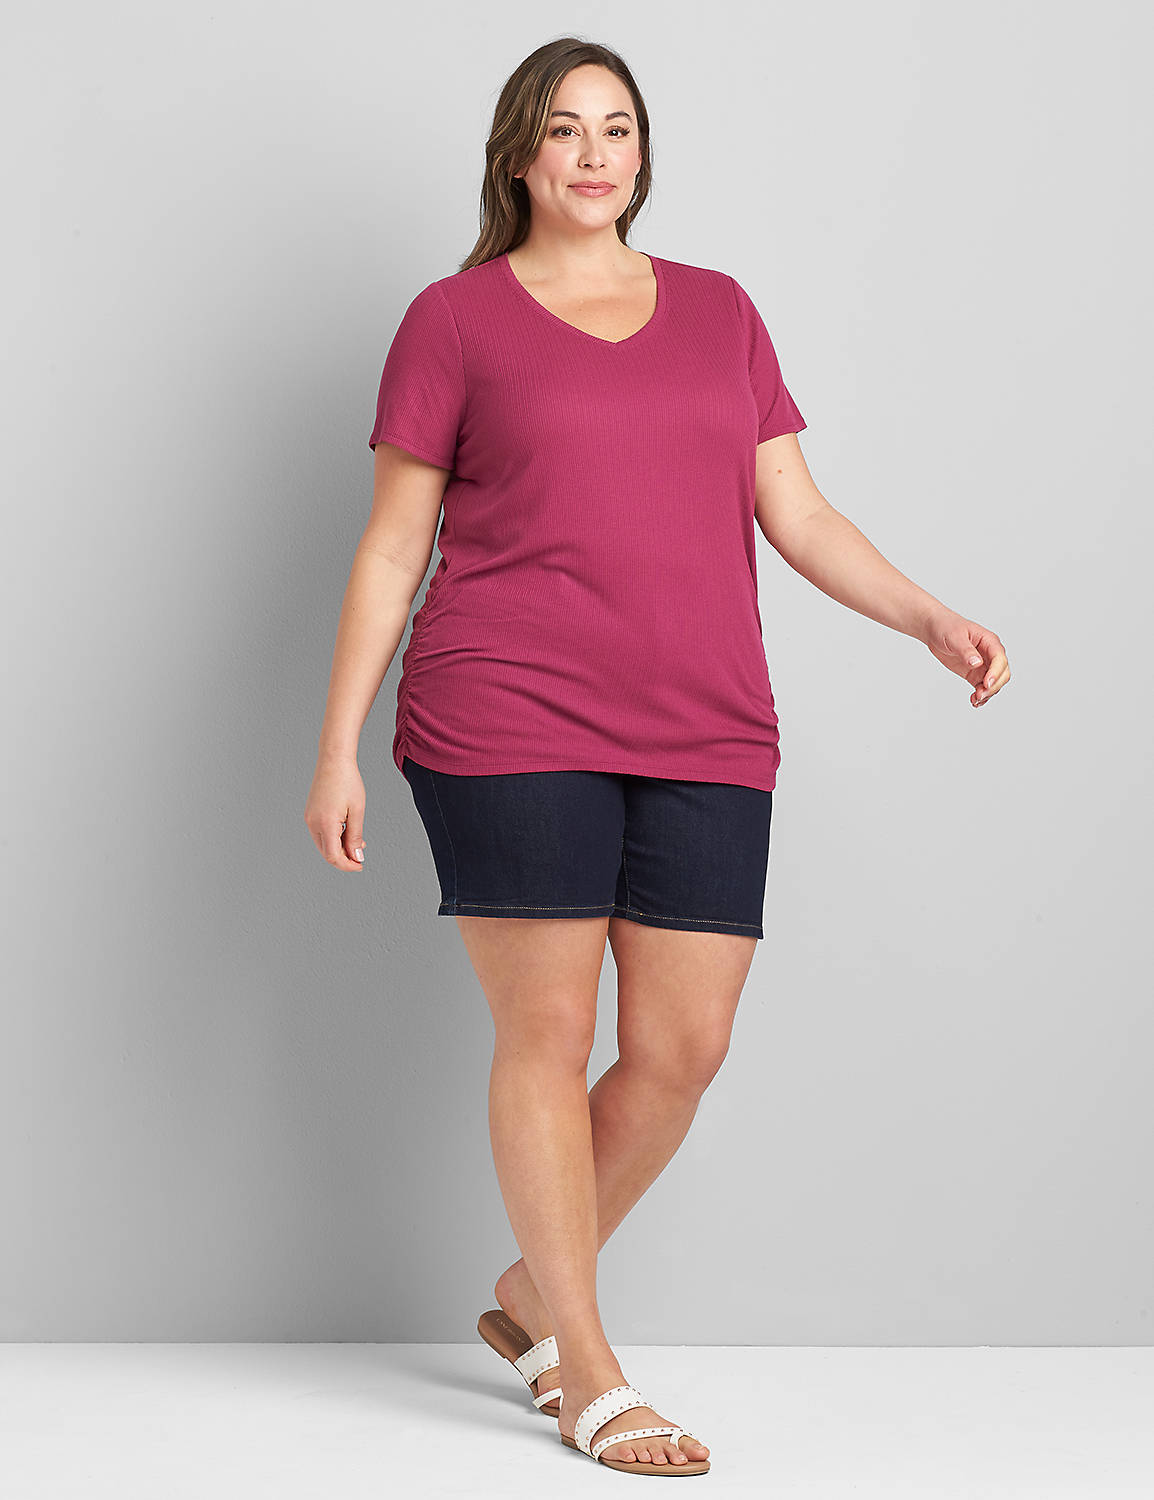 Pointelle Ruched Side Tee Product Image 3